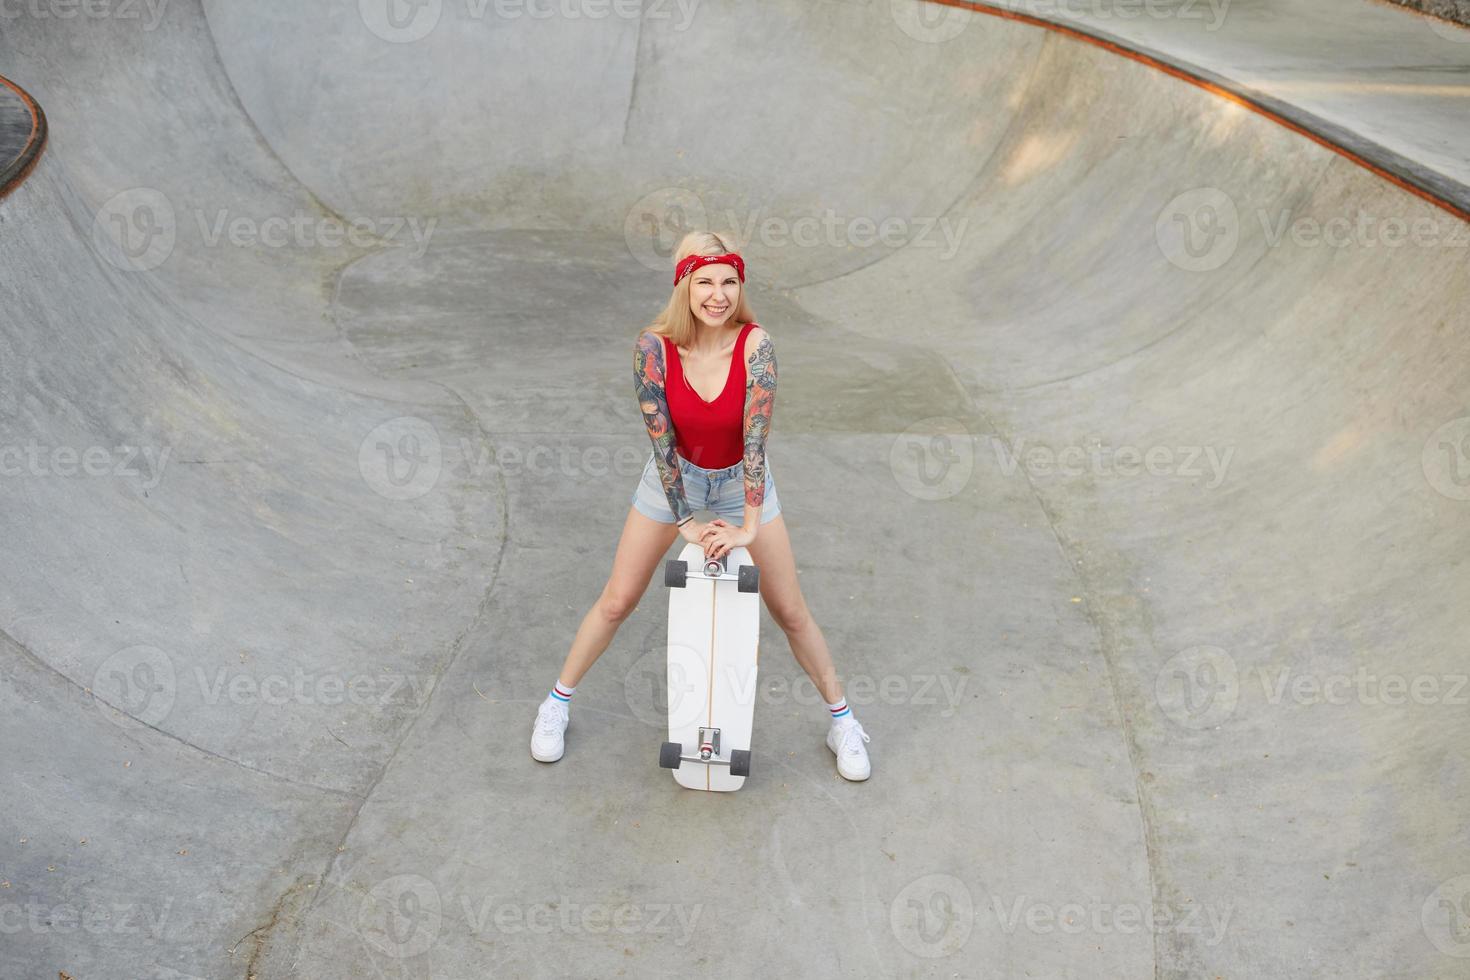 Cheerful long haired tattooed blonde woman posing over skate park on warm bright day, wearing jeans shorts and red top, keeping board in hands and smiling happily photo